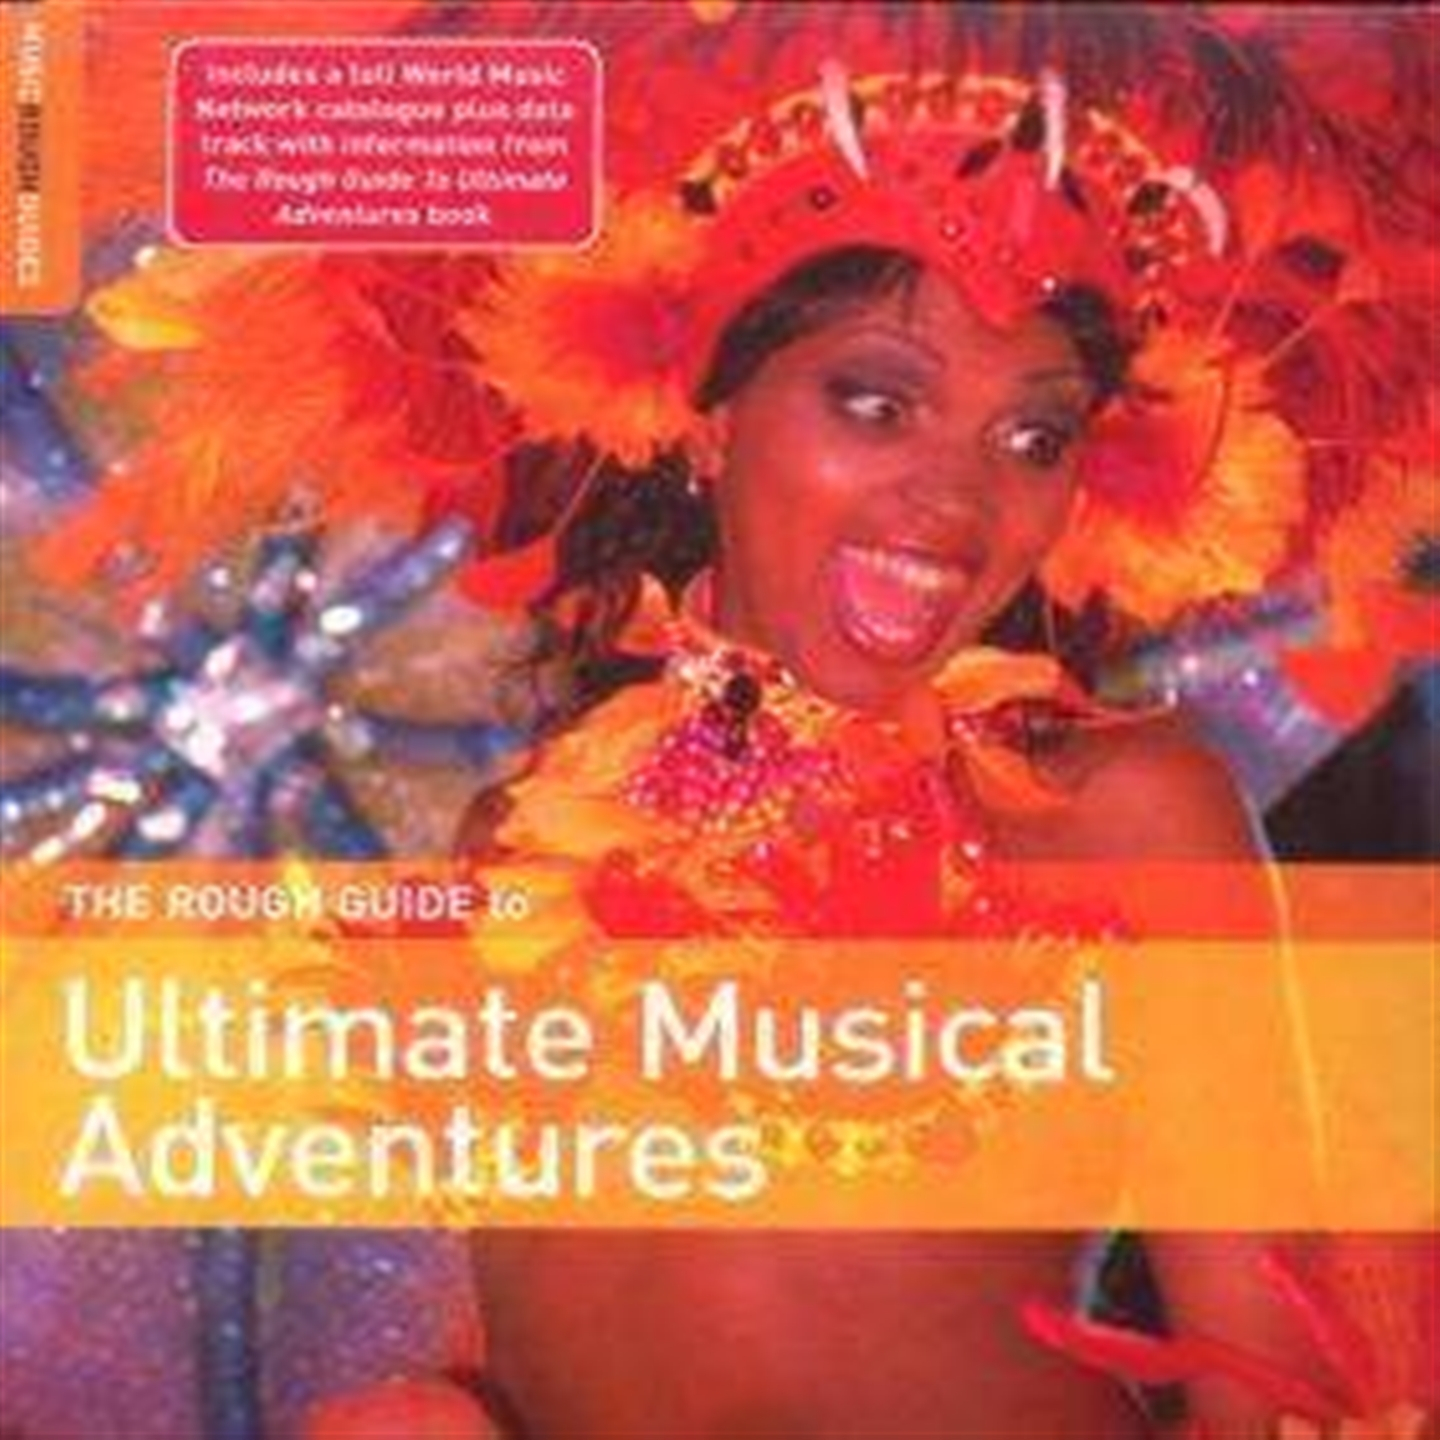 THE ROUGH GUIDE TO ULTIMATE MUSICAL ADVENTURES